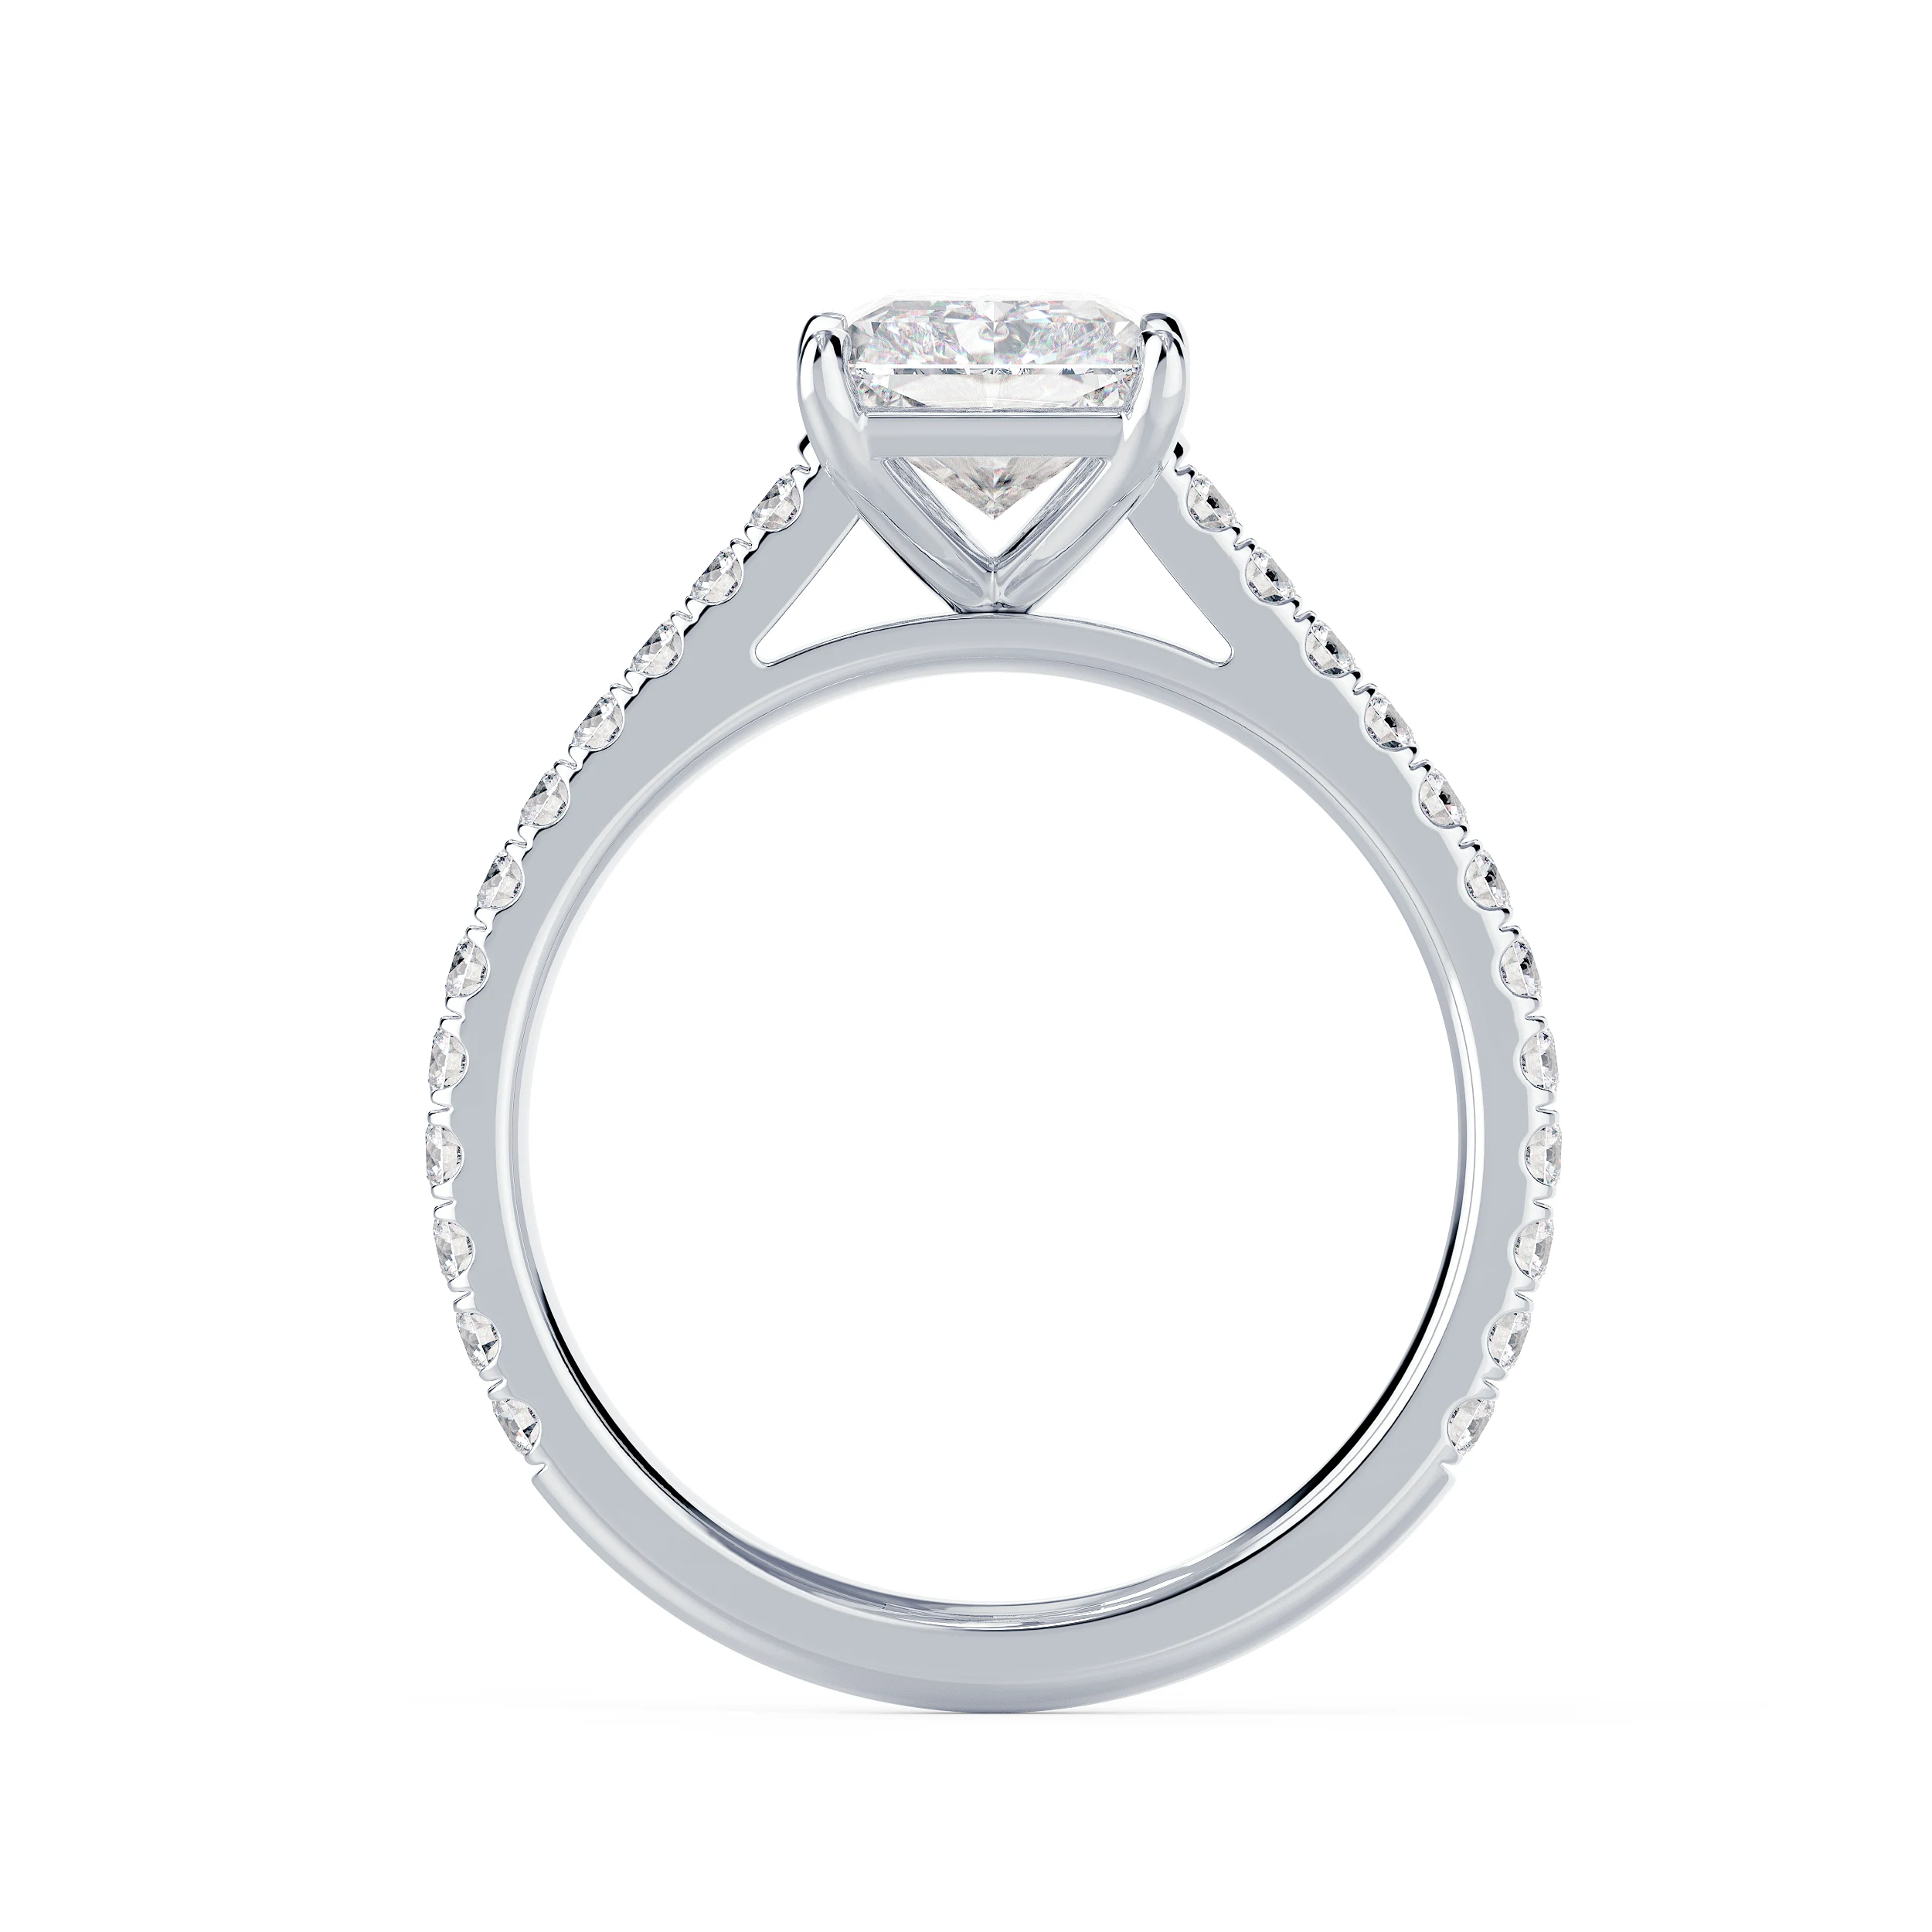 Synthetic Diamonds Radiant Cathedral Pavé Diamond Engagement Ring in White Gold (Profile View)